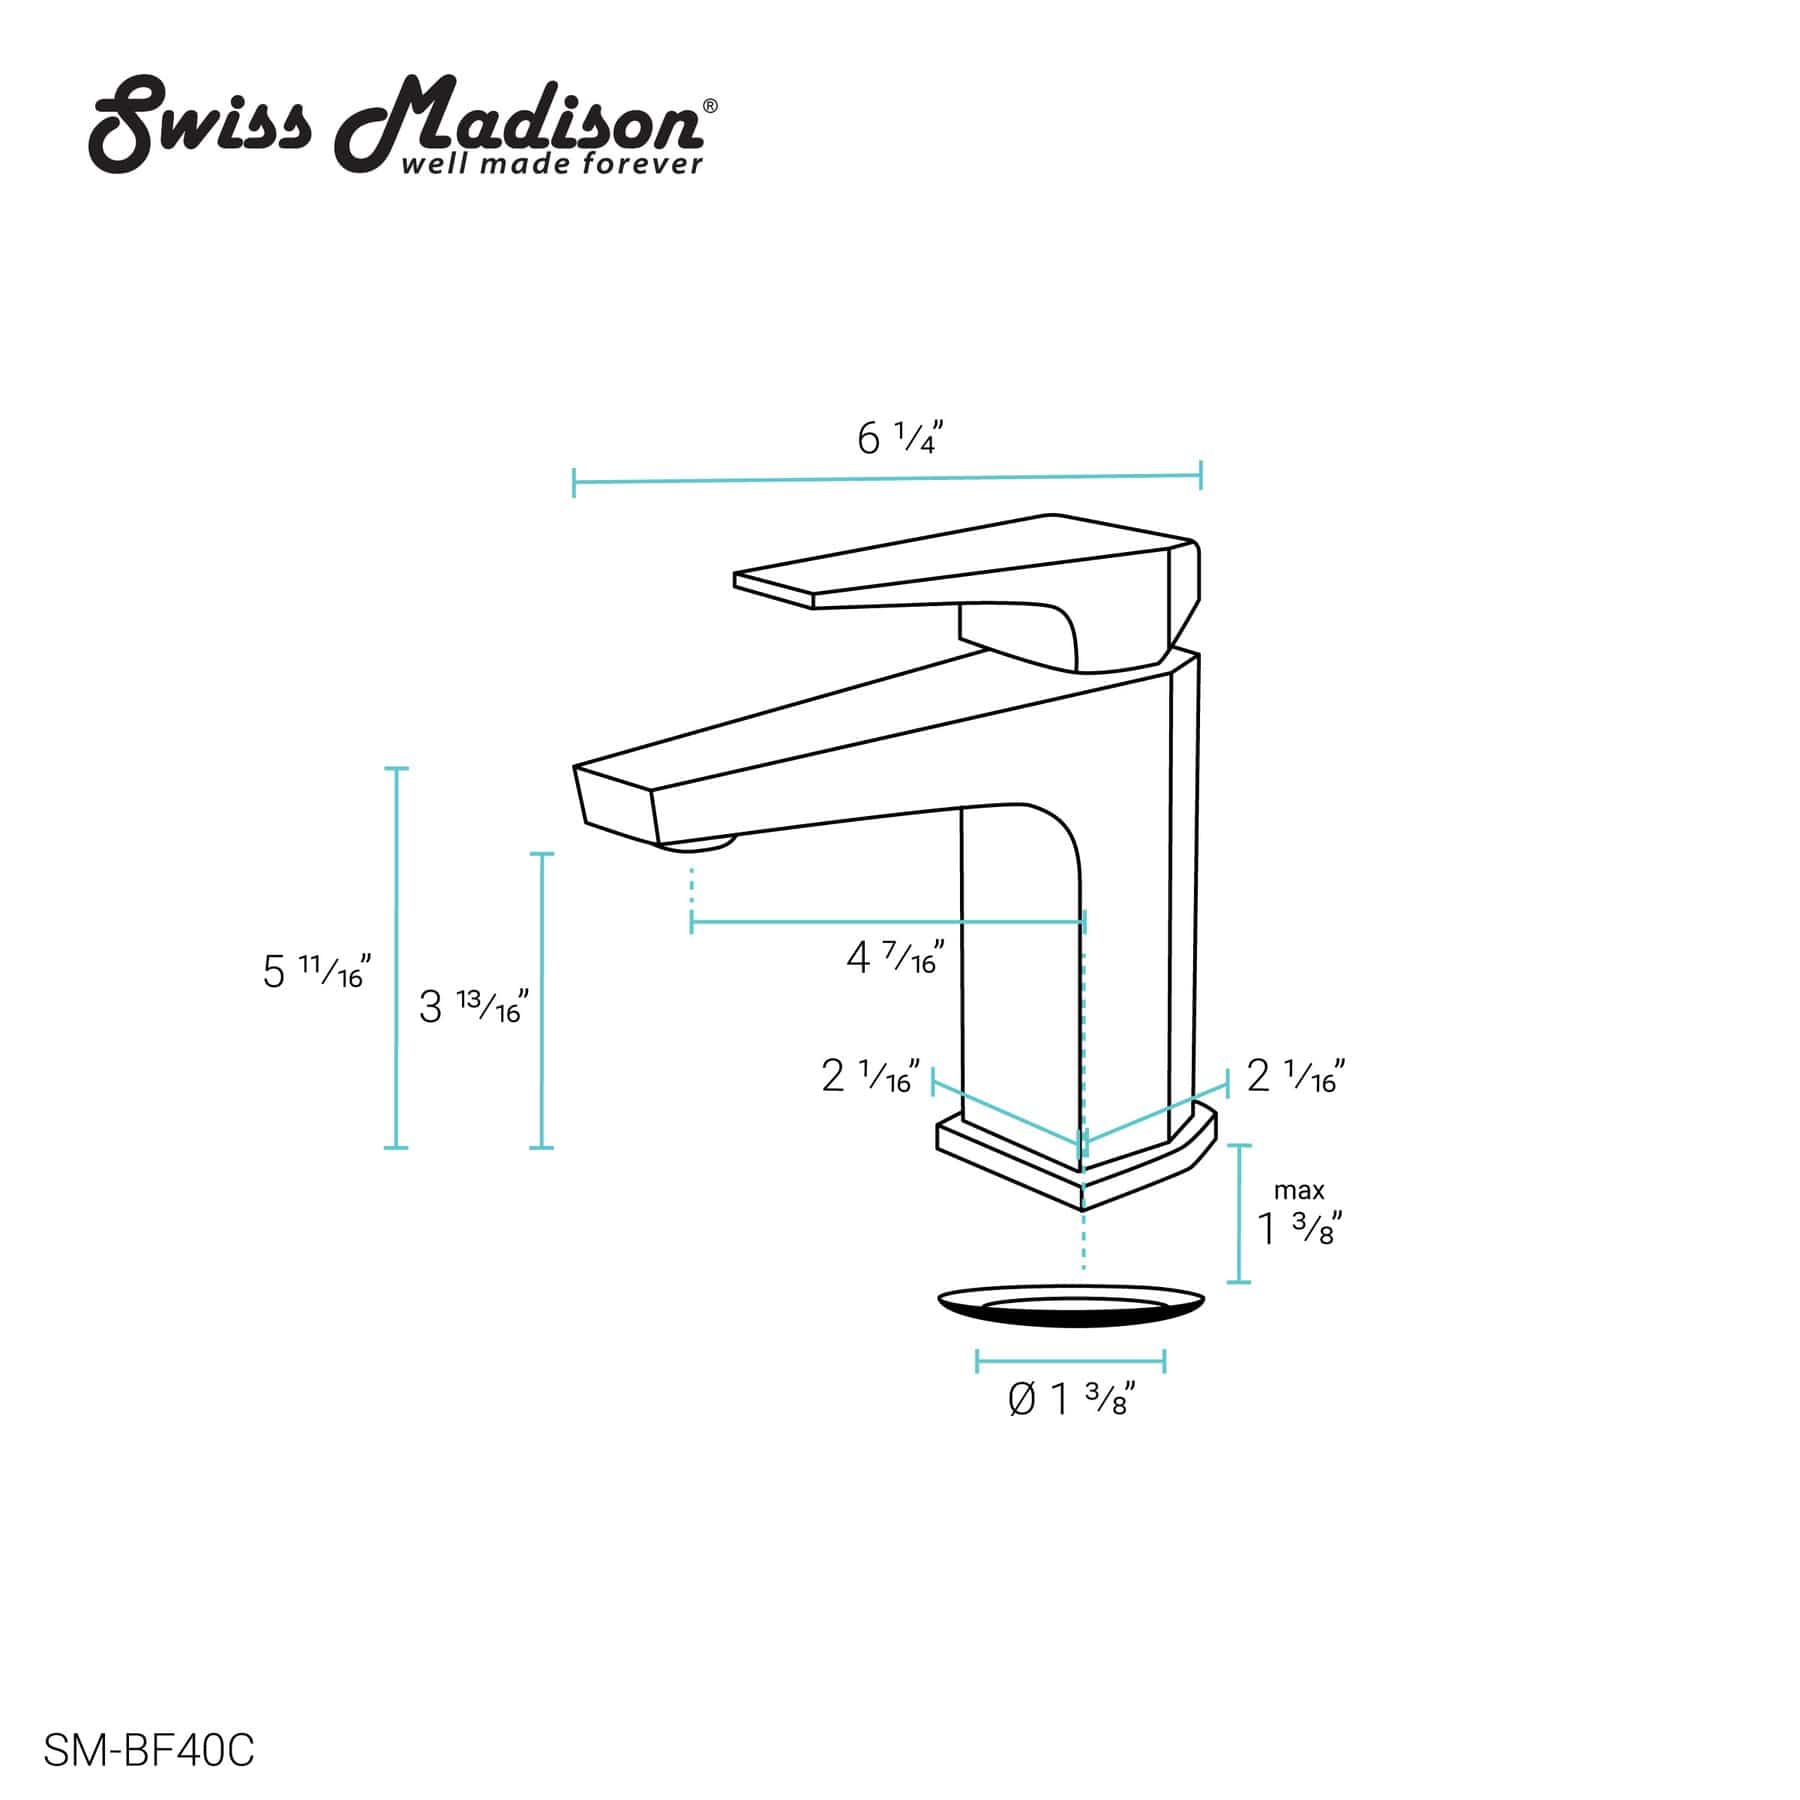 Swiss Madison Voltaire Single Hole, Single-Handle, Bathroom Faucet in Chrome - SM-BF40C - Molaix723552143819AccessoriesSM-BF40C